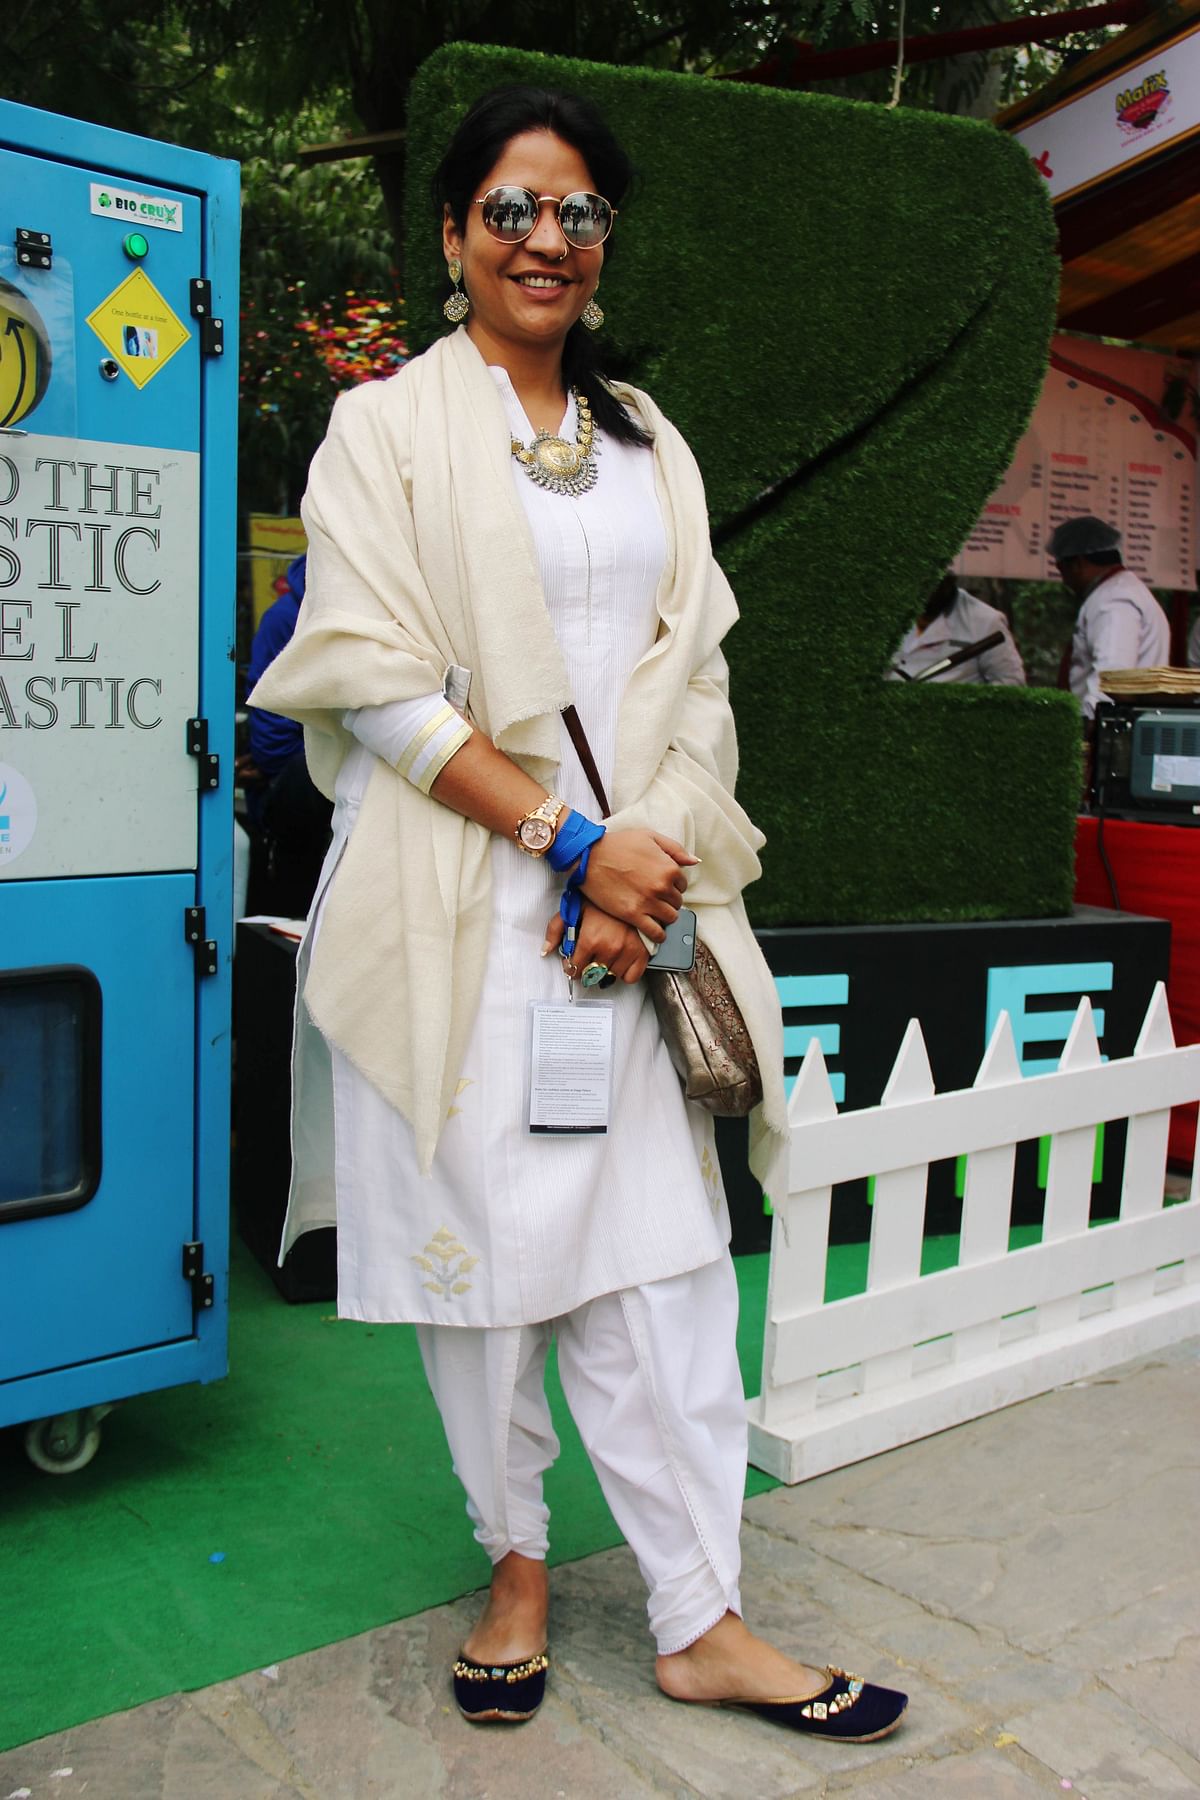 At Jaipur Literature Festival, we meet with interesting subjects that subtly blend fashion and literature together